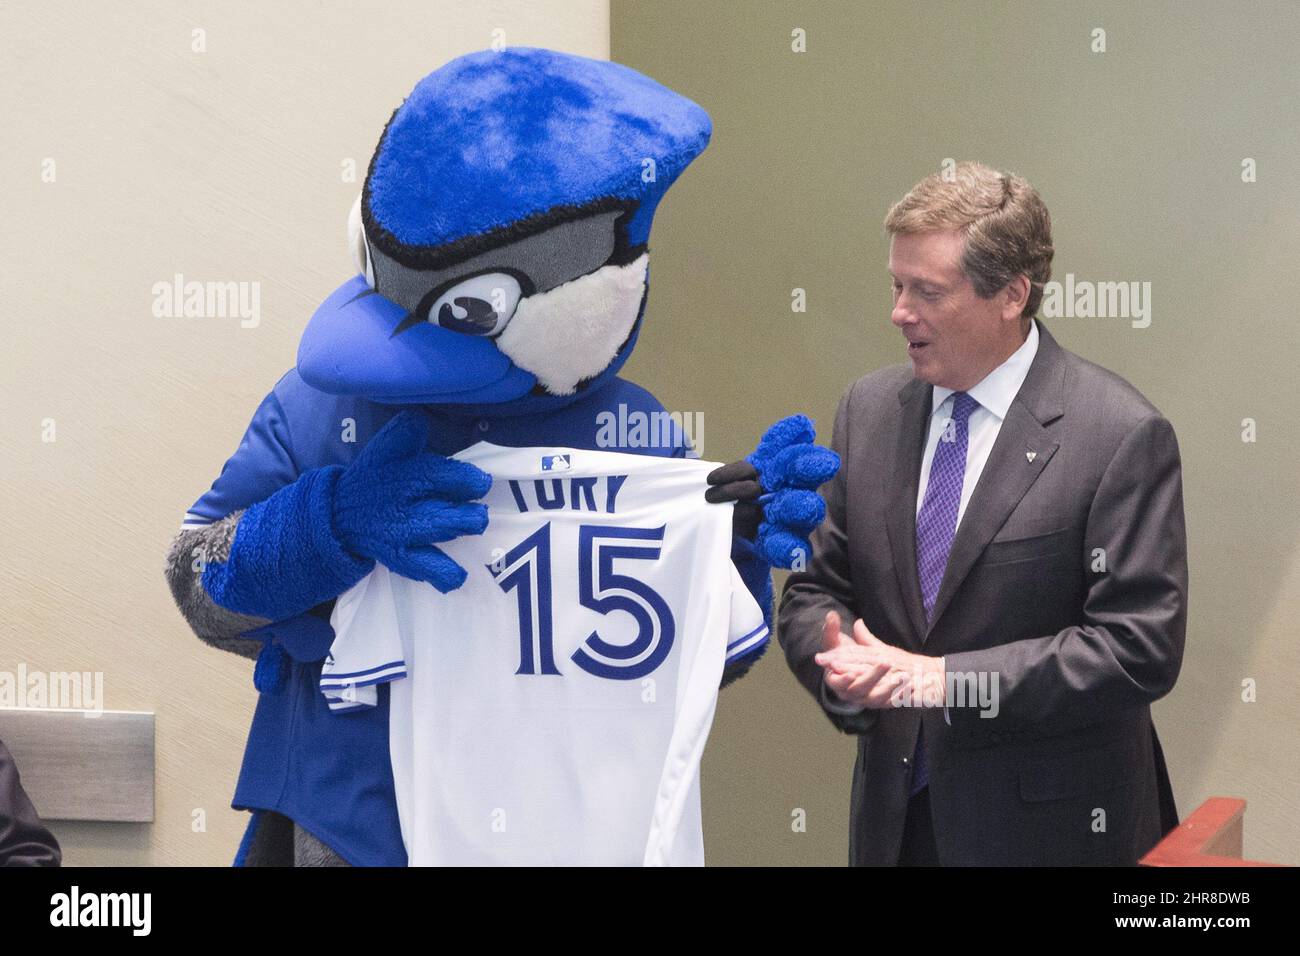 CORRECTS DAY OF THE WEEK Toronto Mayor John Tory is presented with a  replica shirt by Toronto Blue Jays mascot Ace makes a guest appearance to  mark the baseball team's MLB play